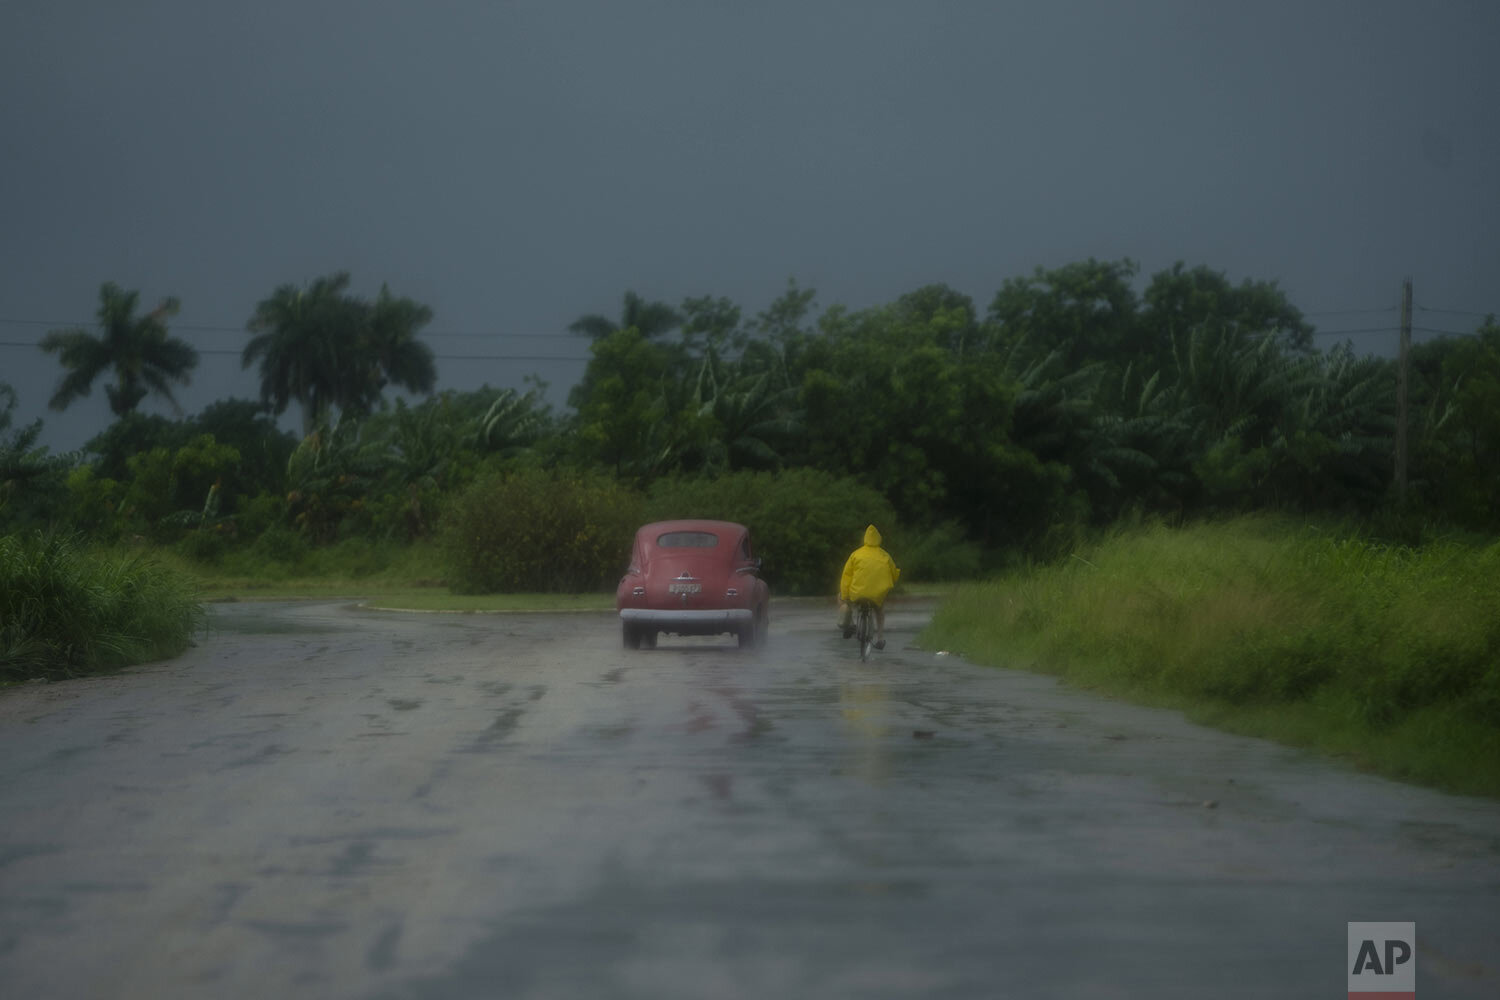  A man rides a bicycle alongside a car in the rain brought by Hurricane Ida, in Guanimar, Artemisa province, Cuba, Aug. 28, 2021. (AP Photo/Ramon Espinosa) 